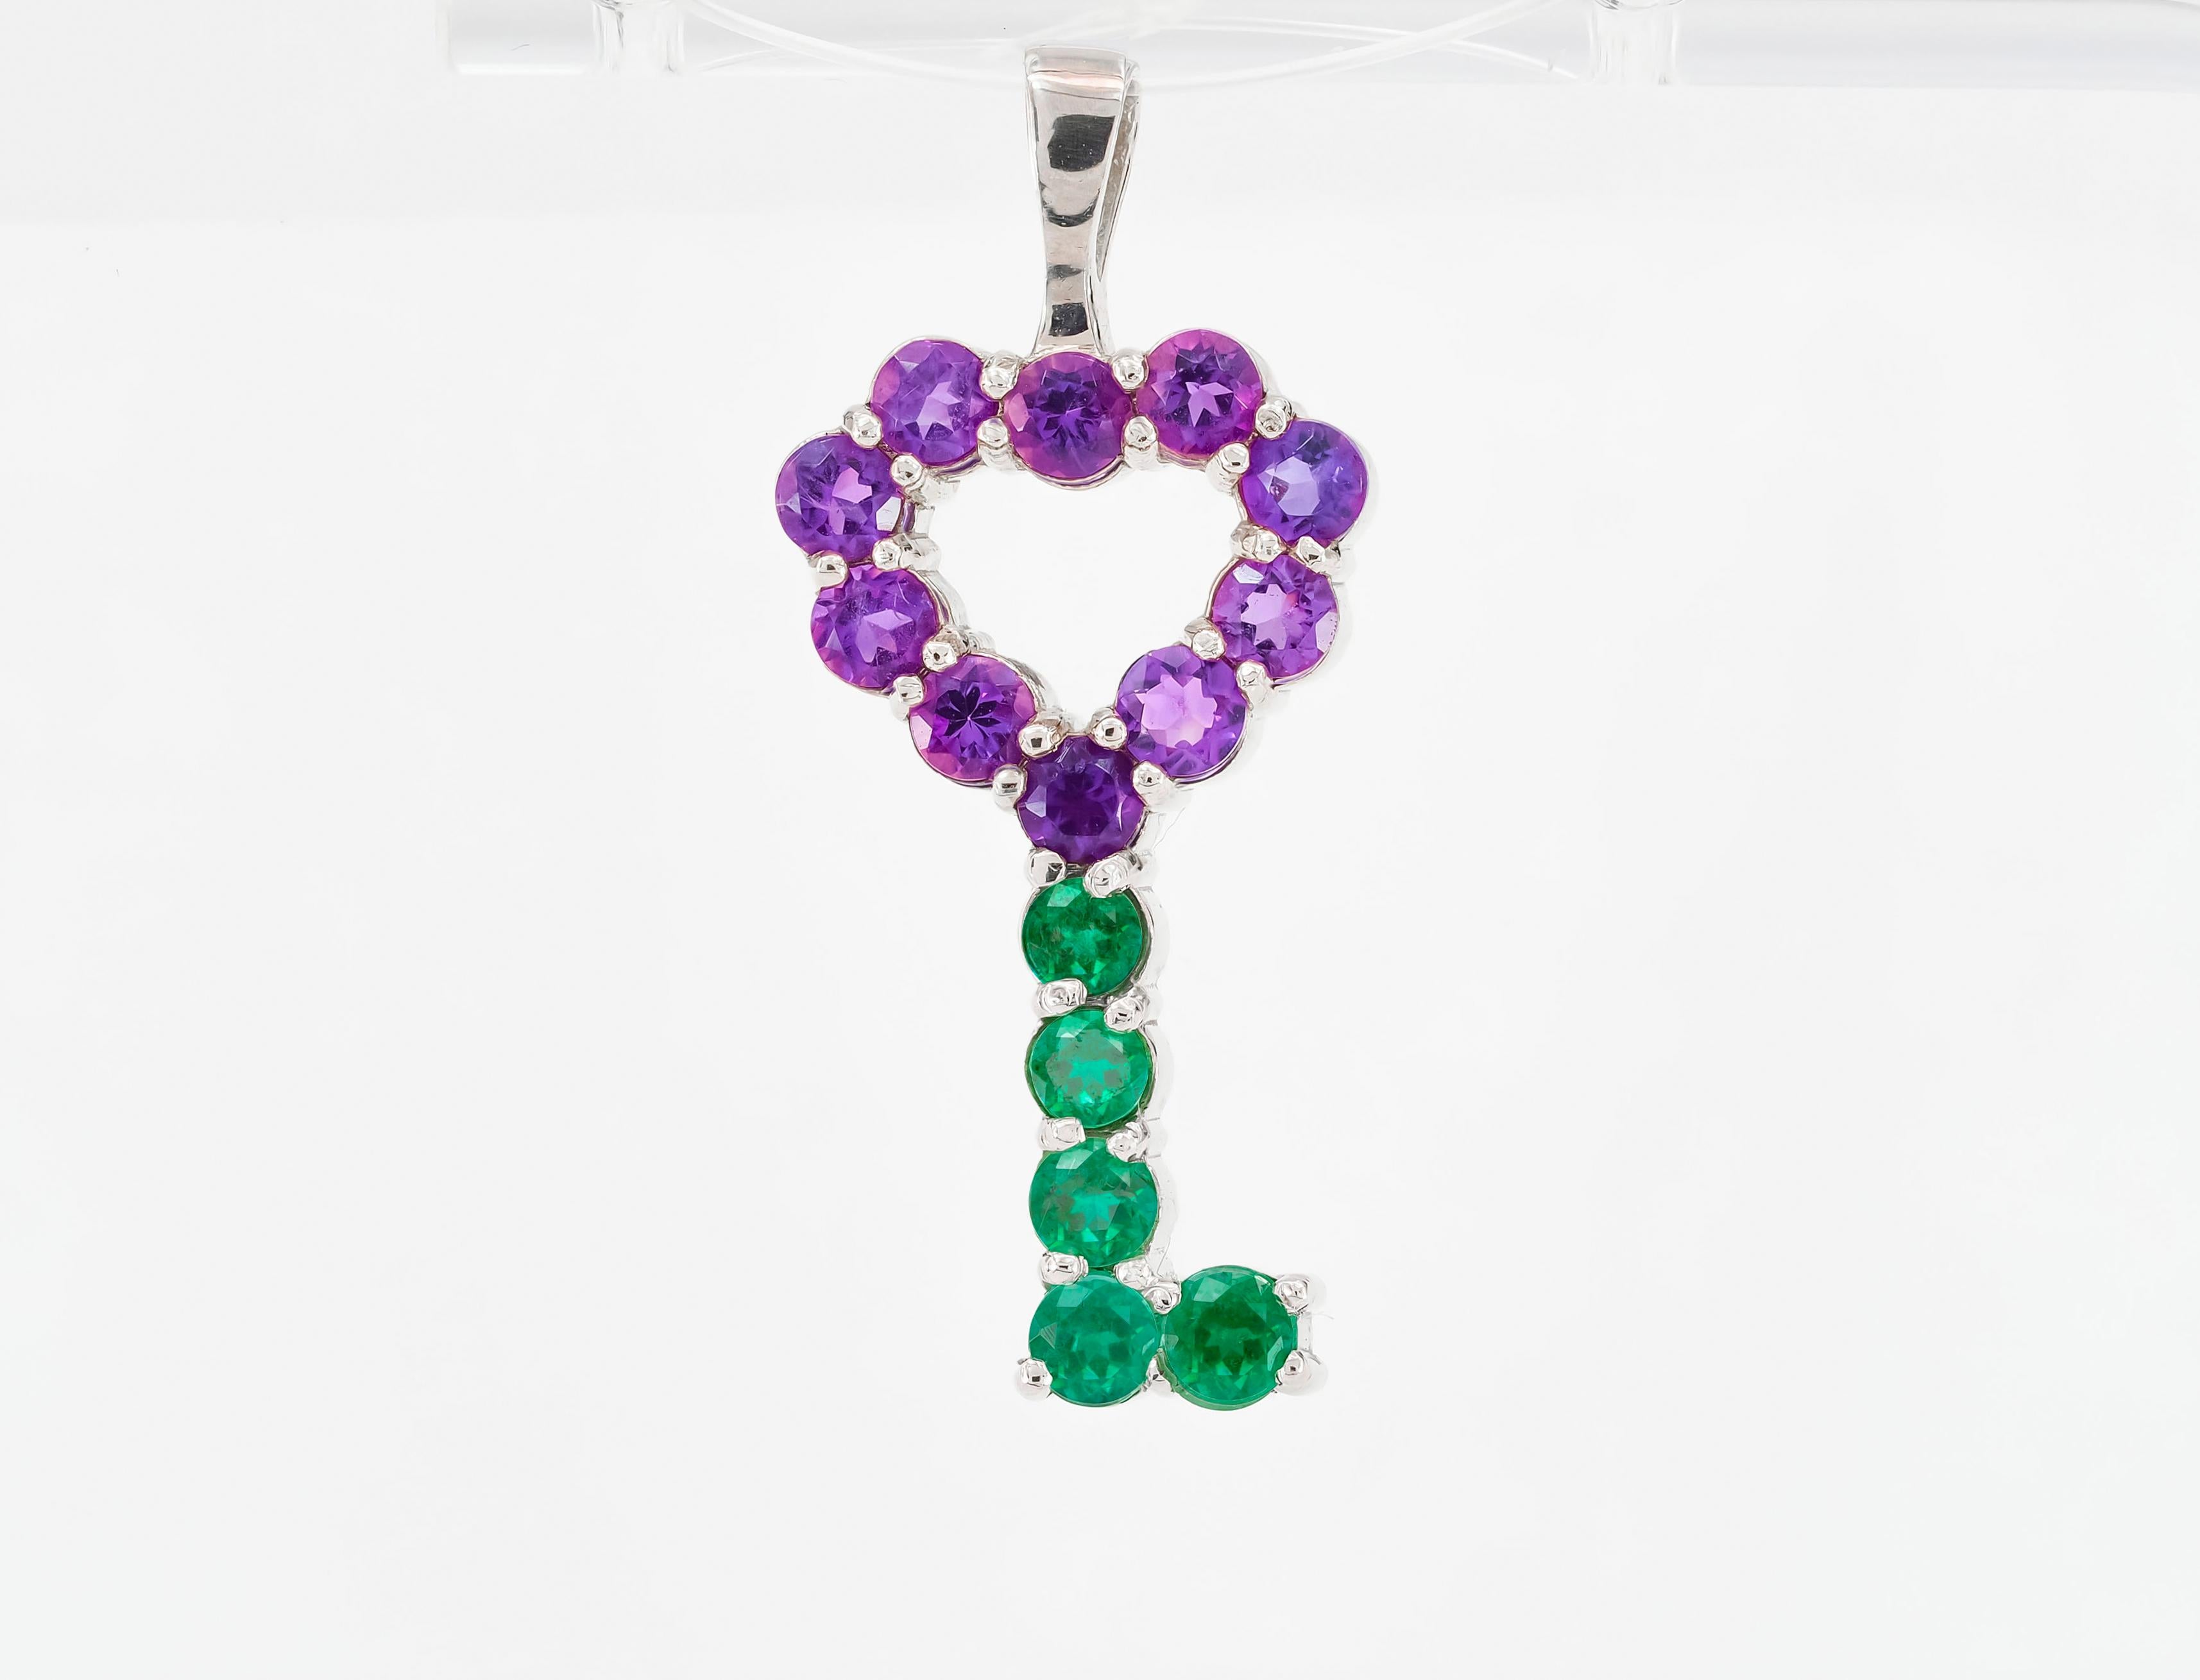 Women's Key pendant with Amethysts, emeralds.  For Sale